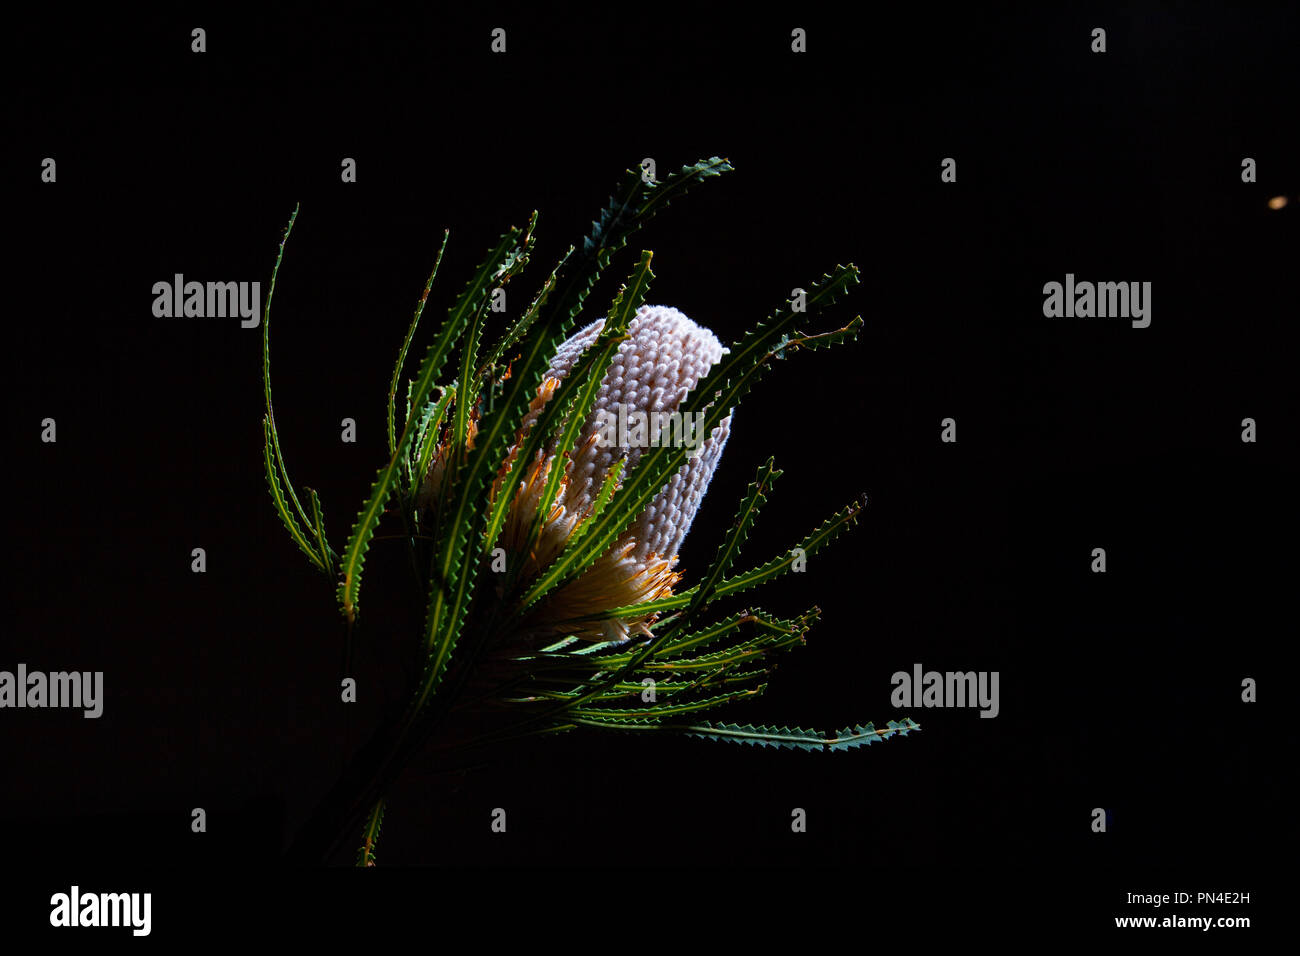 Banksia wild flower glowing on black background with copy space Stock Photo